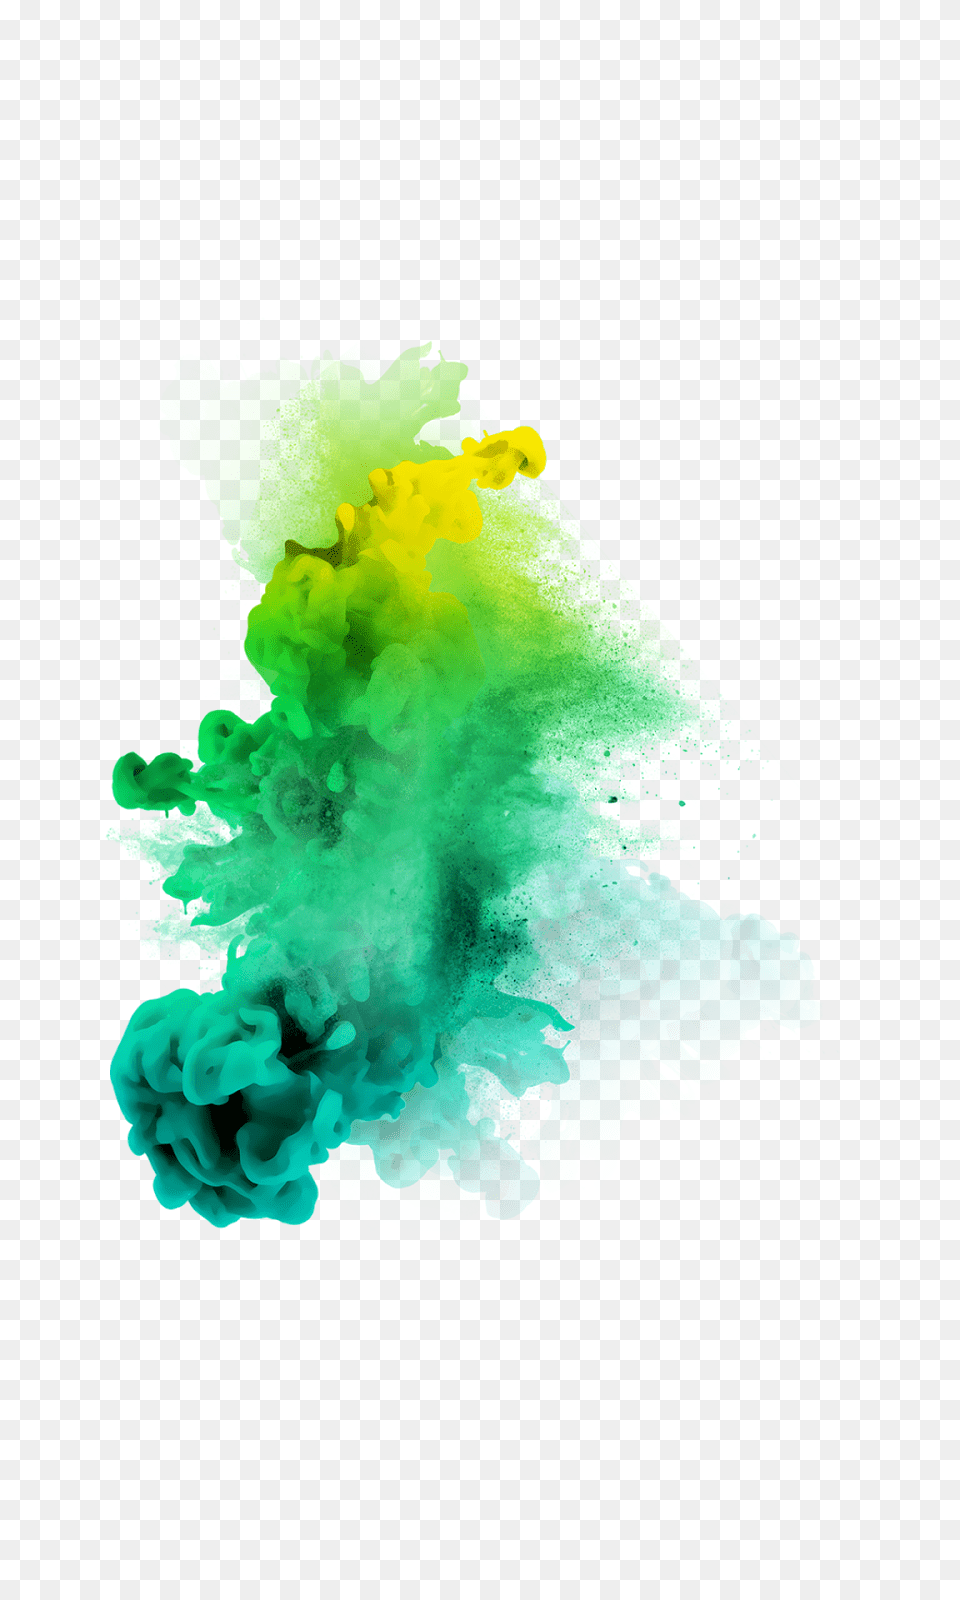 Image With Transparent Background Transparent Background Picsart Smoke, Mineral, Art, Graphics Free Png Download